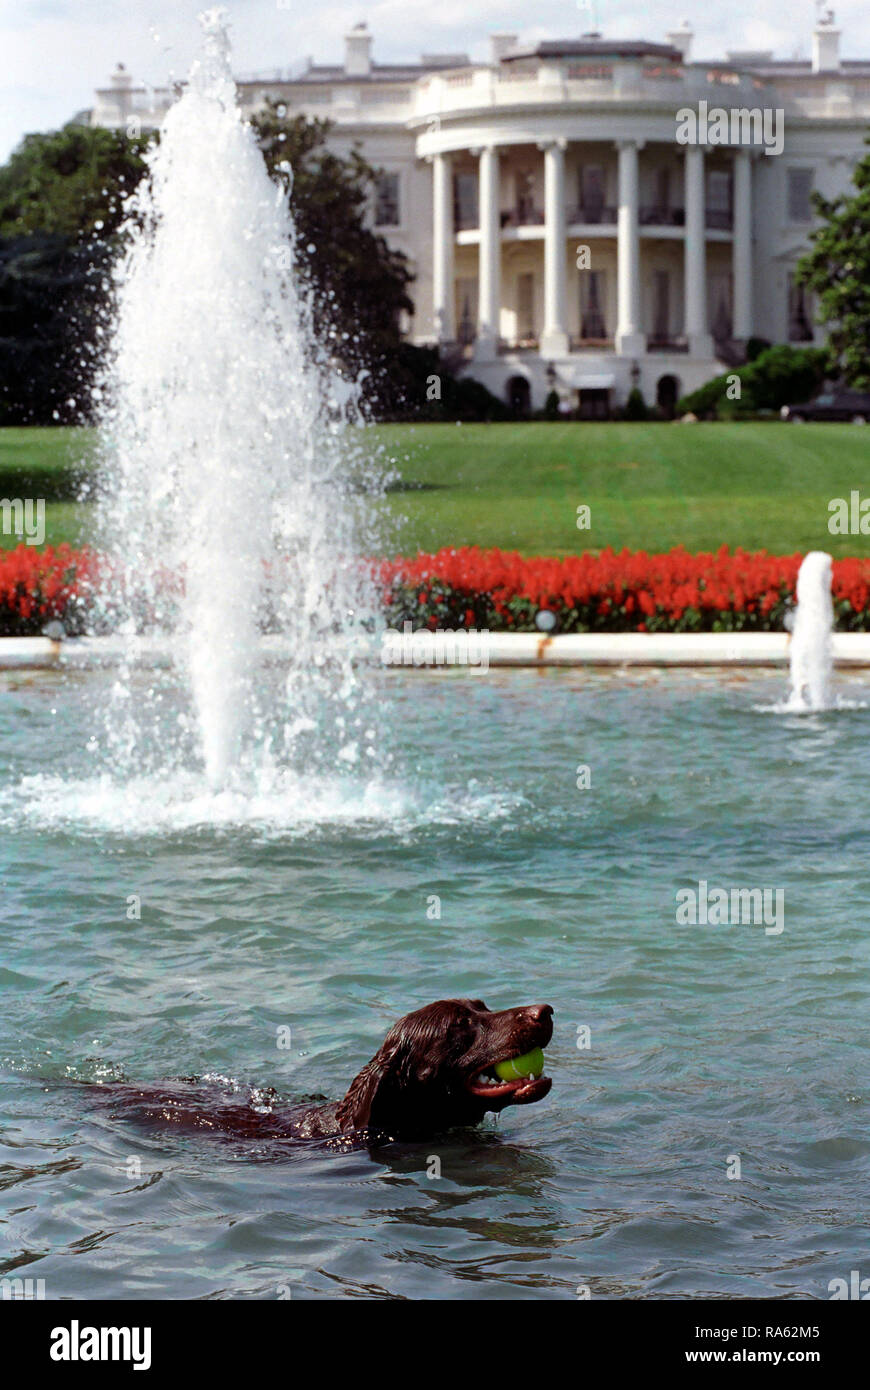 7/12/1998 Photograph of Buddy the Dog in the White House Swimming Pool Retrieving a Tennis Ball Stock Photo